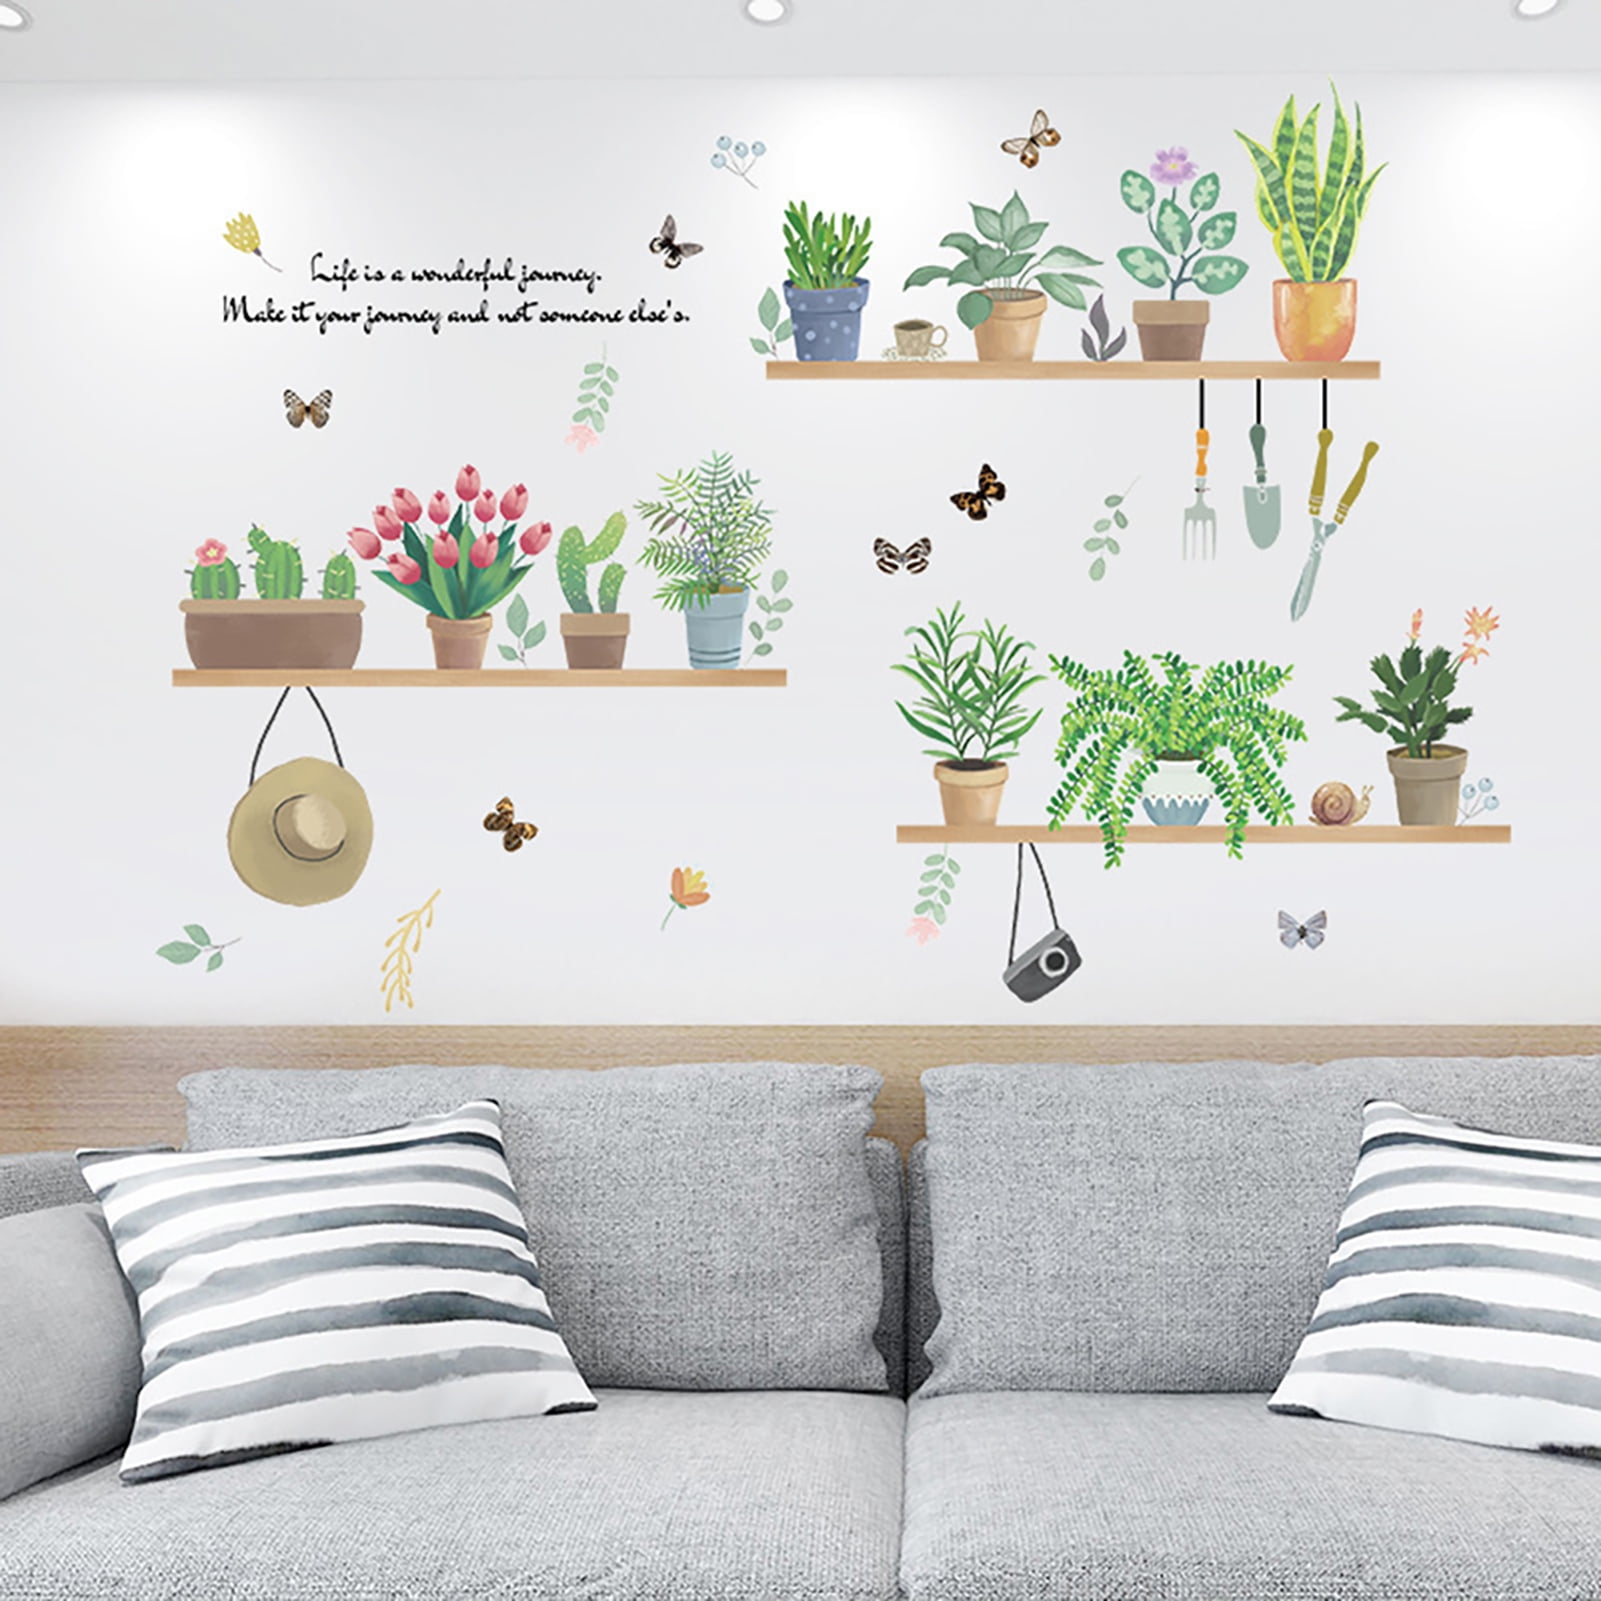 Cactus Wall Sticker Cartoon Potted Green Plants Wall Decal Removable DIY Cactus Bonsai Sticker Family Mural Decal Decorative Wall Art for Girls Bedroom Nursery Room Sofa Background Wall Decoration 